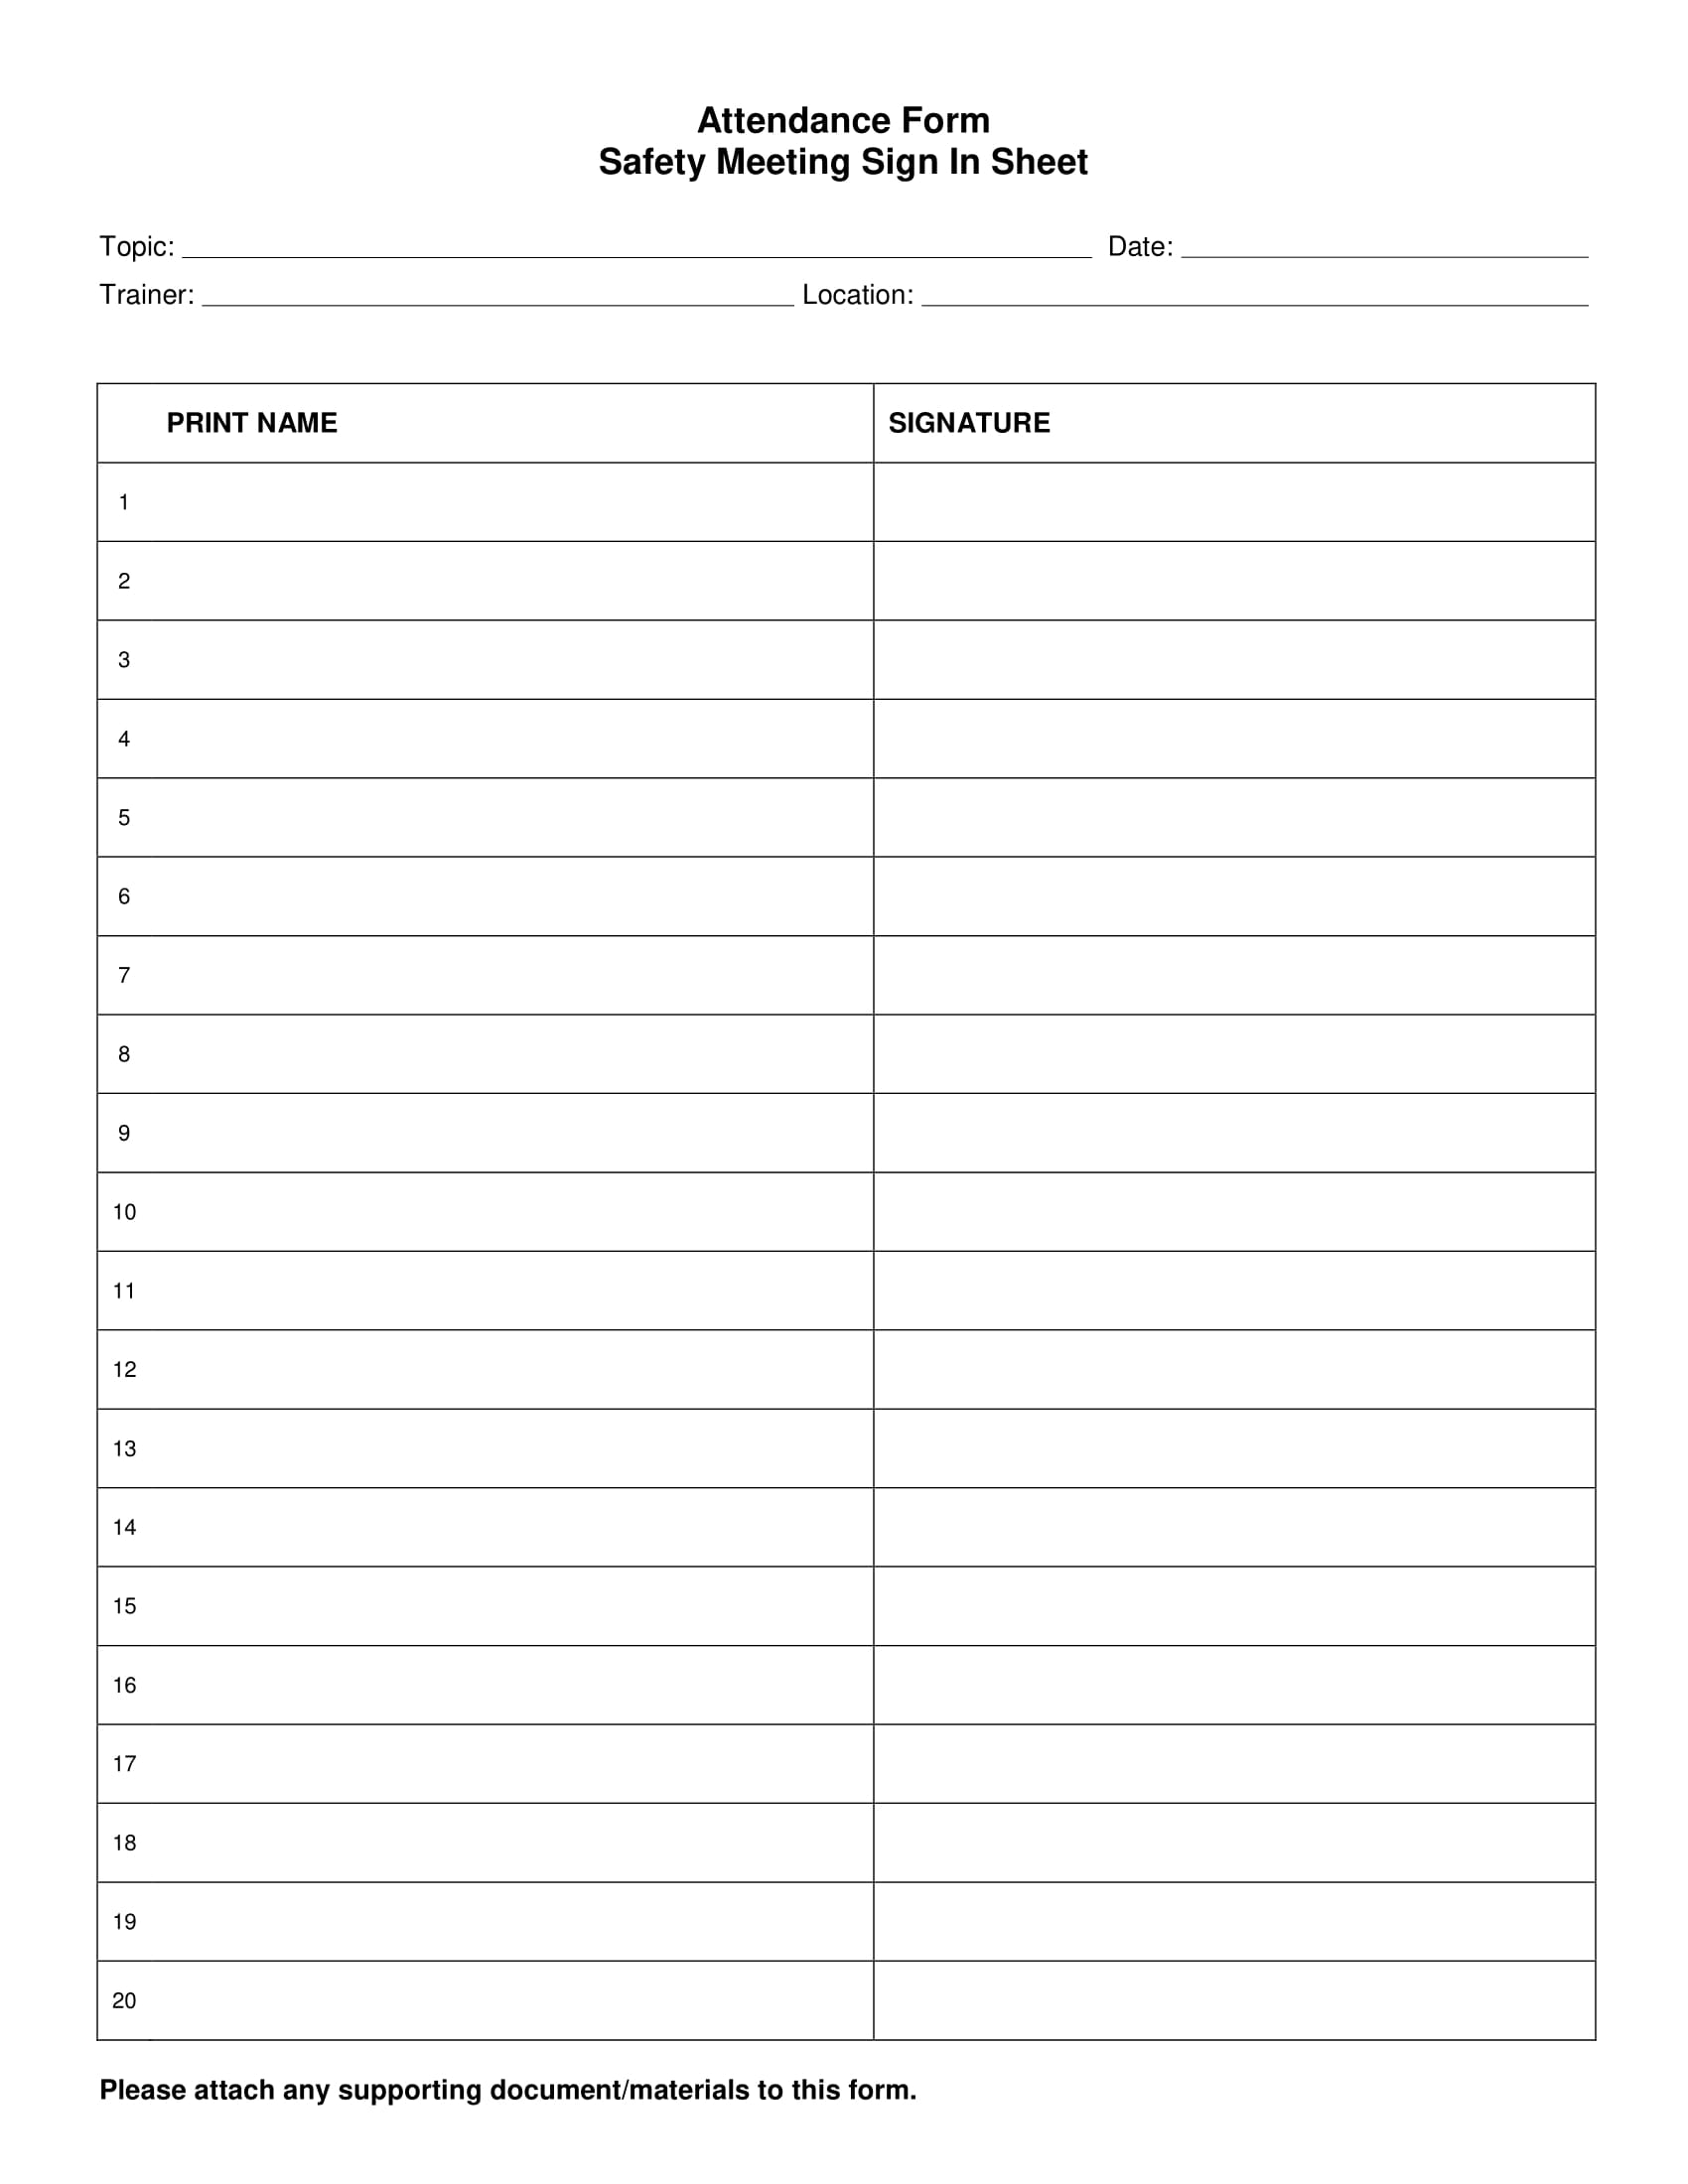 9 Employee Attendance Form Examples Pdf Word Examples Safety meeting sign off sheet